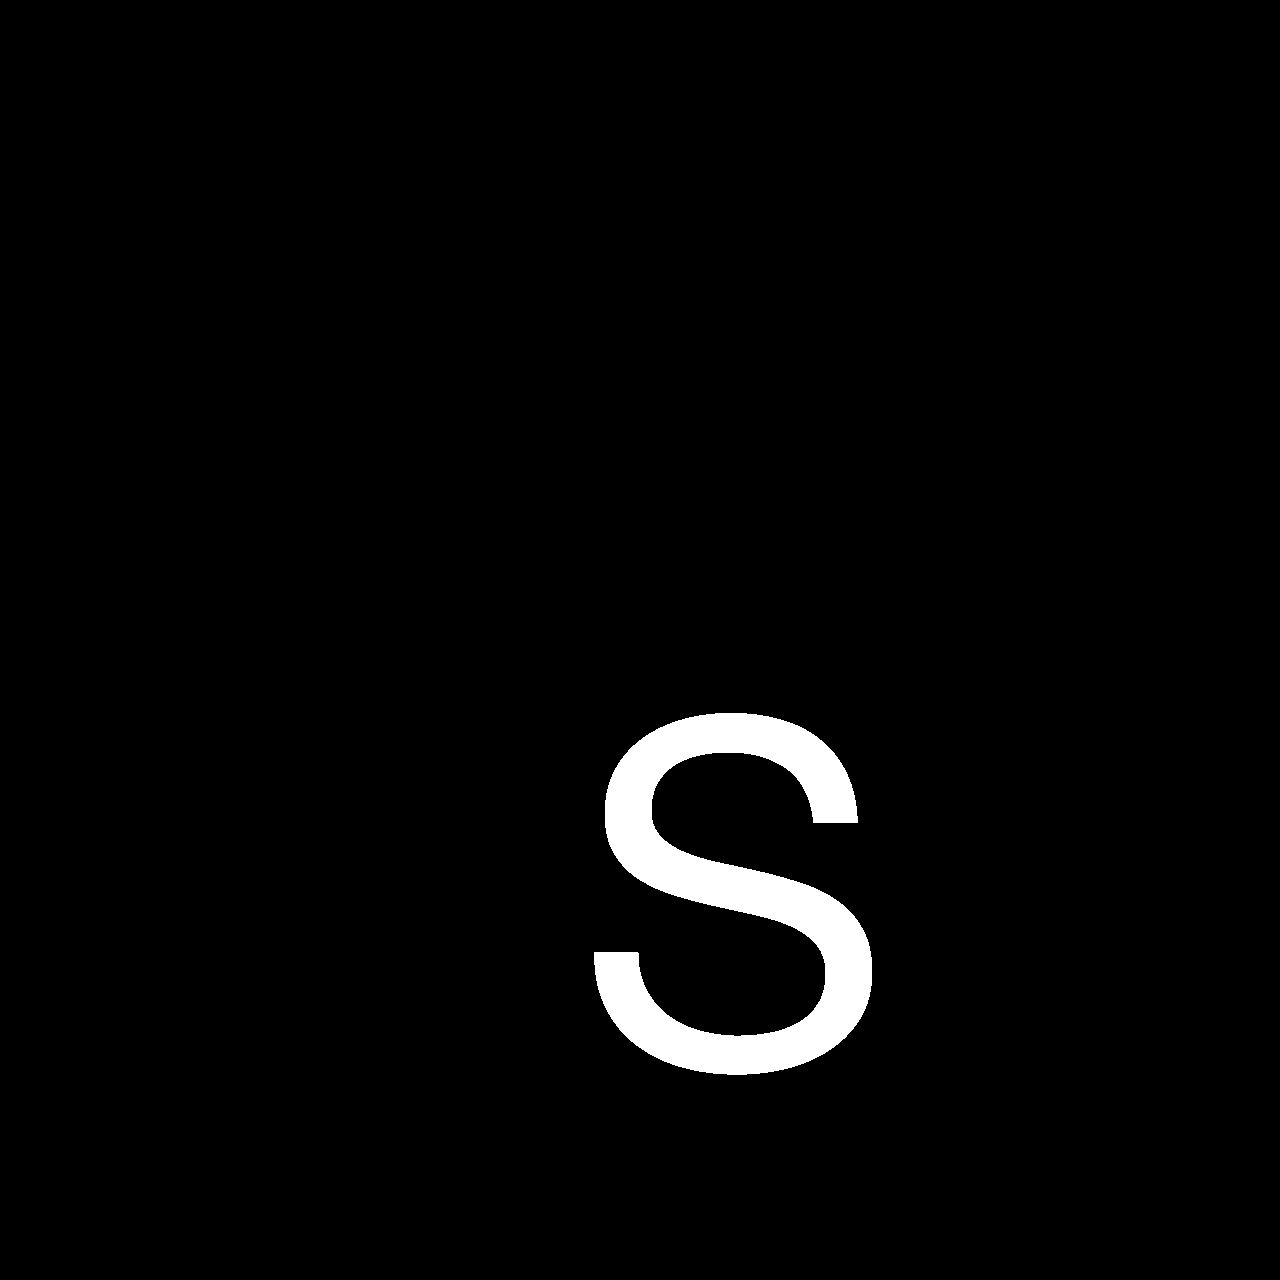 Spine Press - Type Plant - Letter S